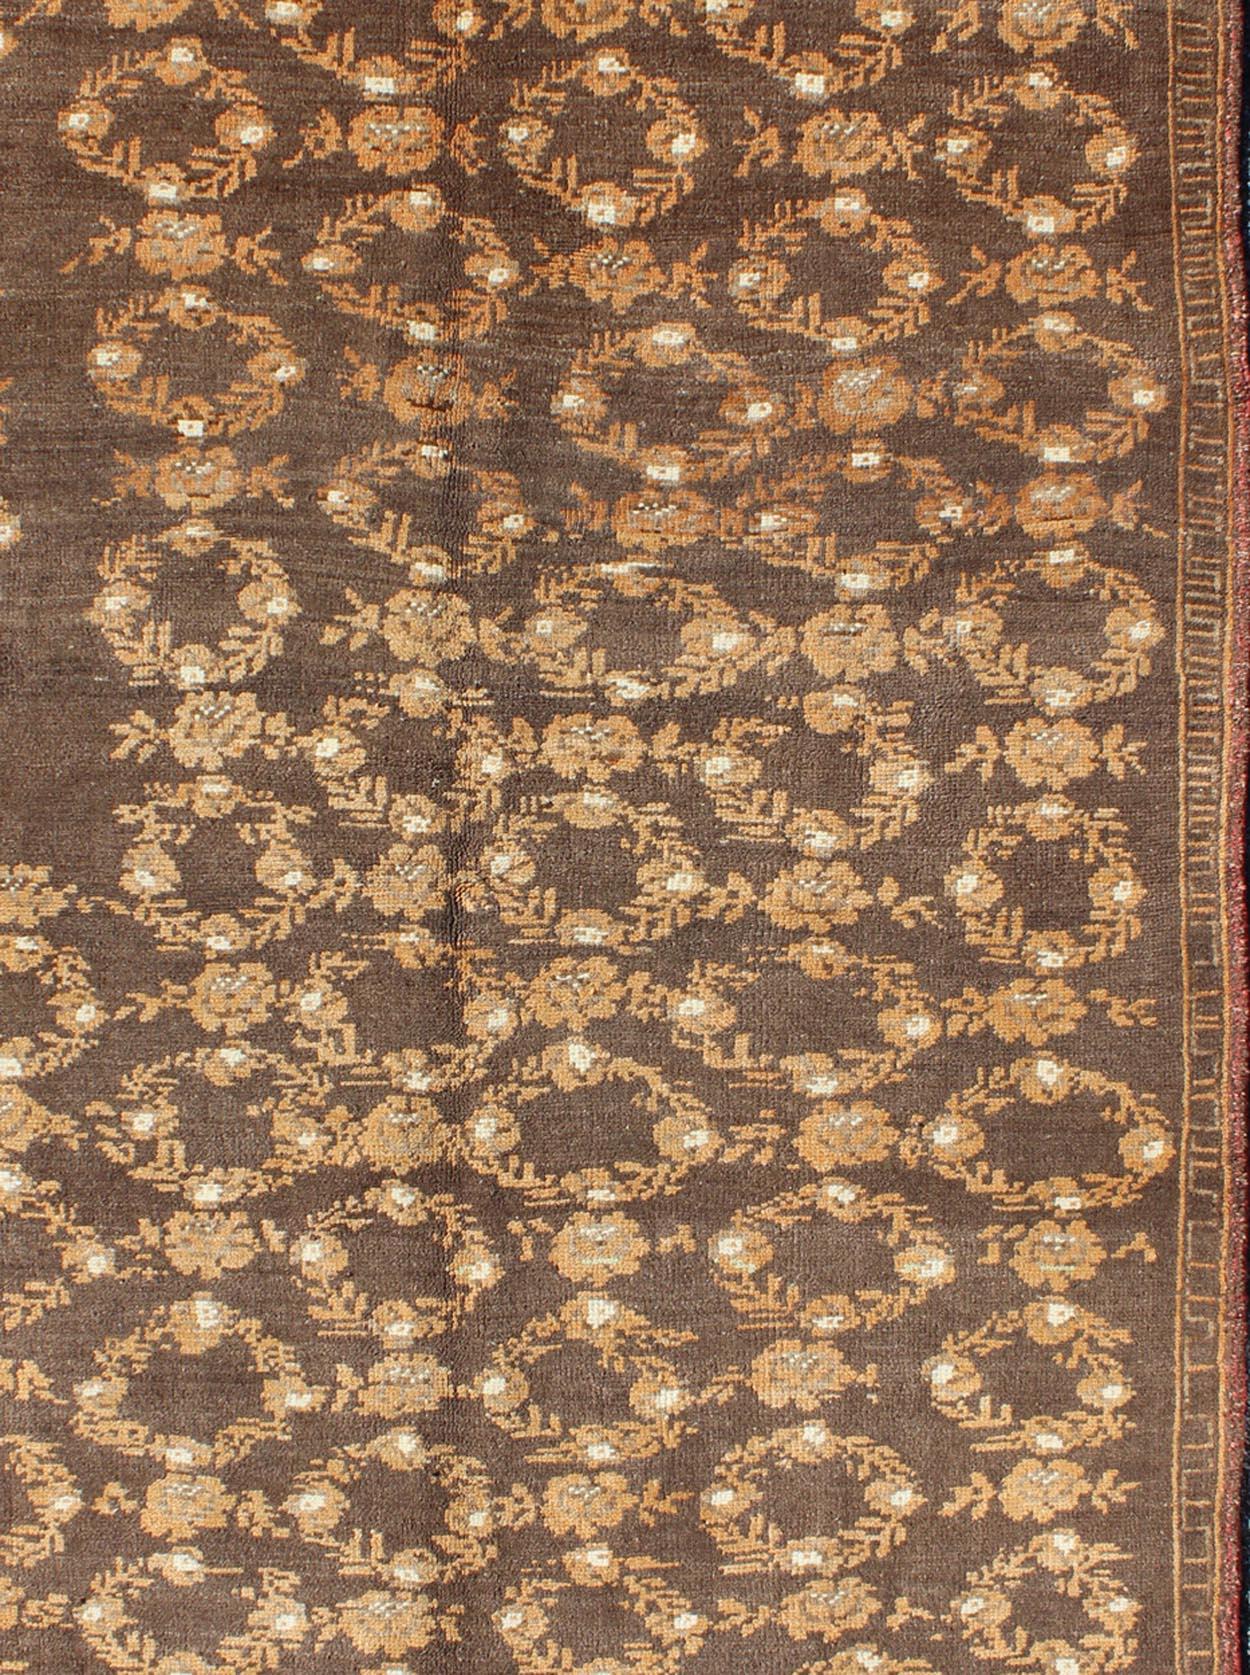 All-Over Floral Wreath Design Turkish Oushak Rug with Brown Background In Good Condition For Sale In Atlanta, GA